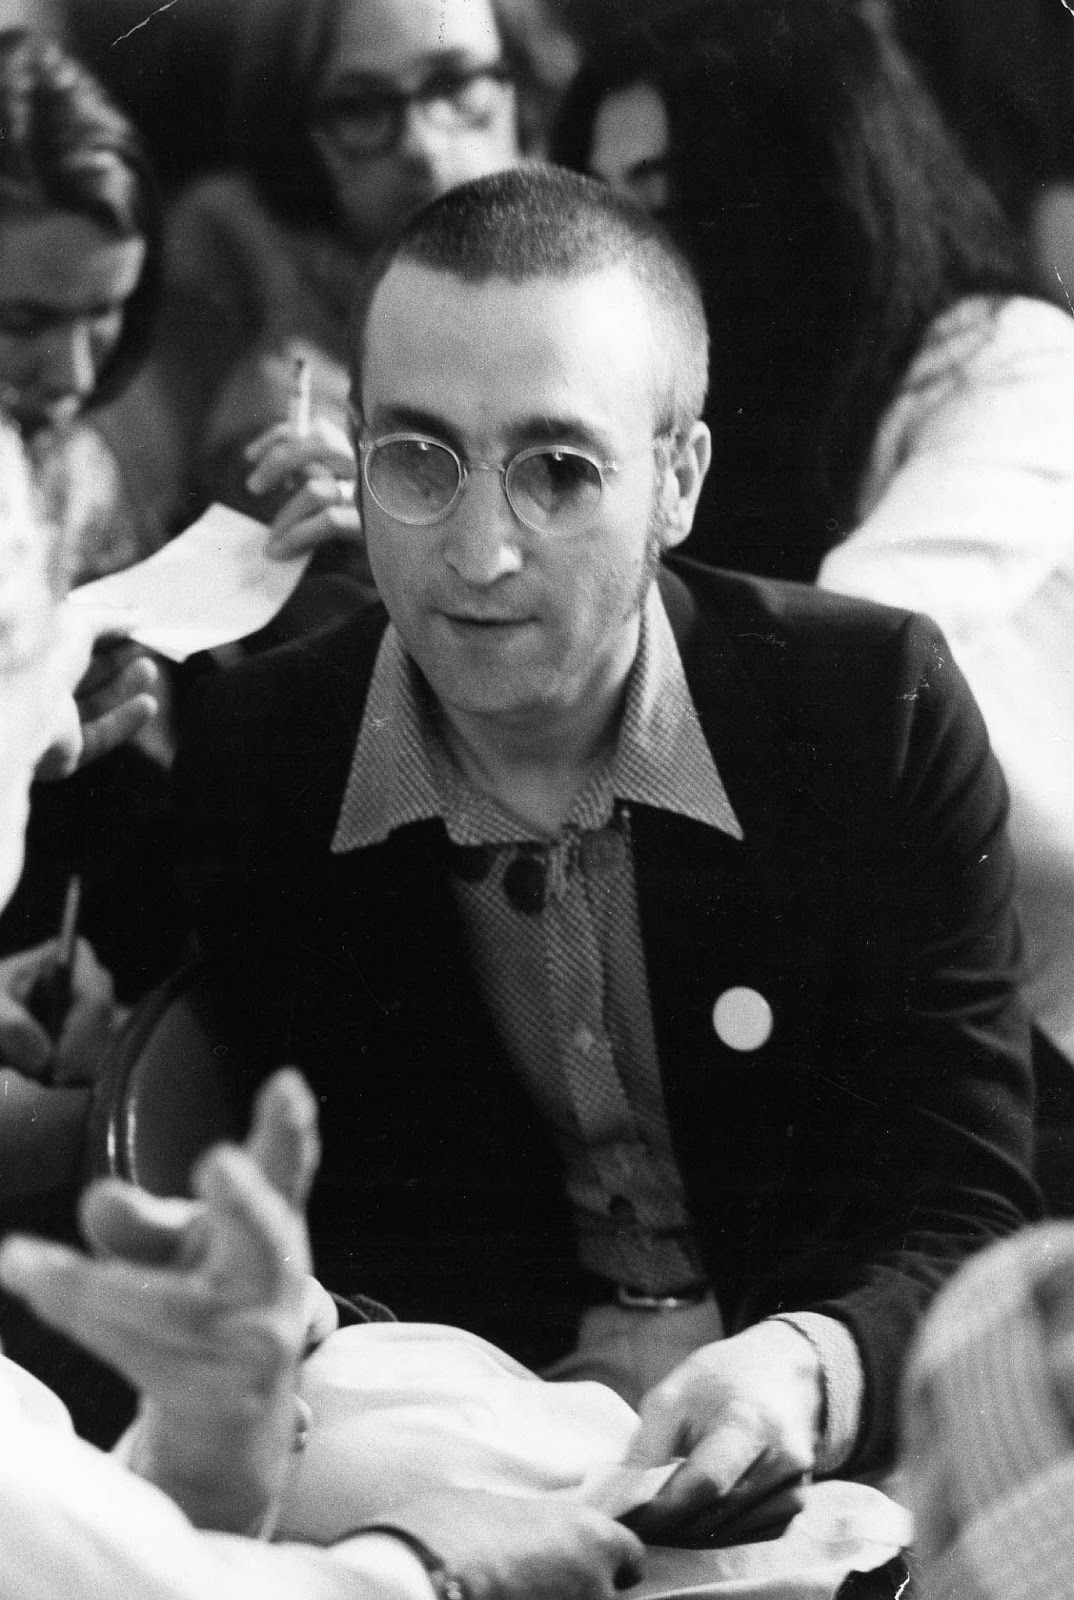 We All Shine On Is It Just Me Or Does John Lennon Look Realllly